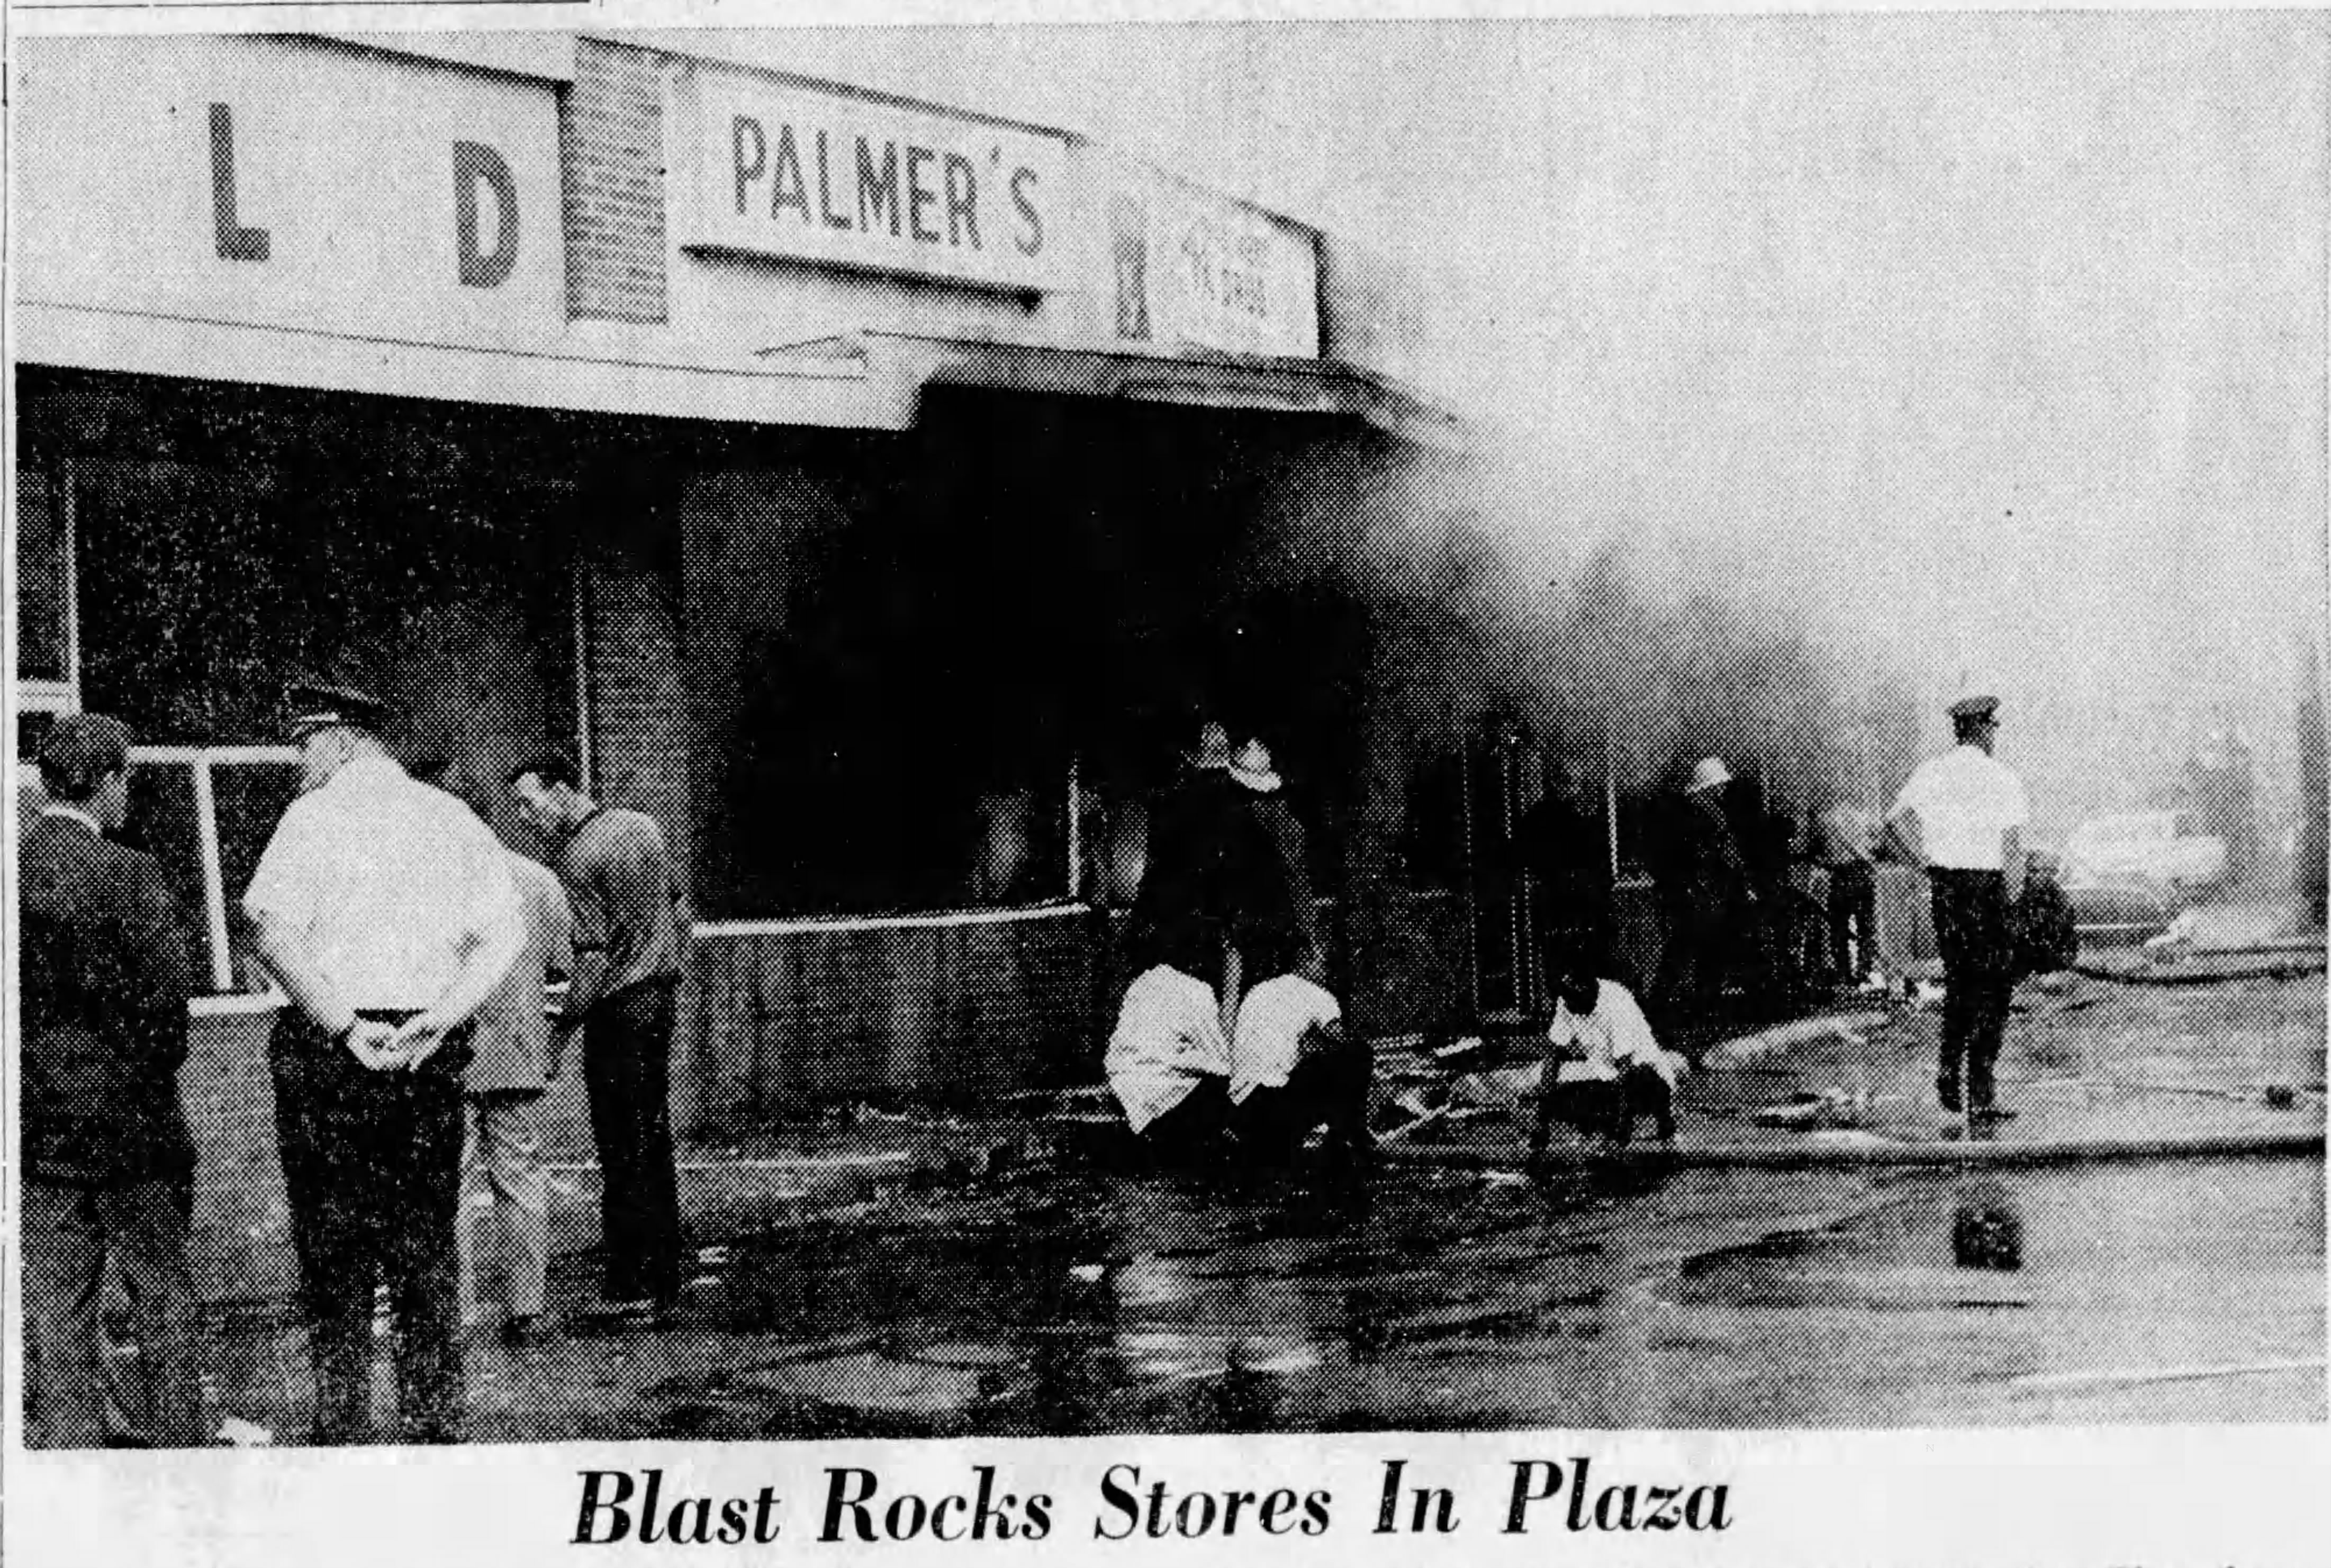 Palmer's pharmacy following the bombing